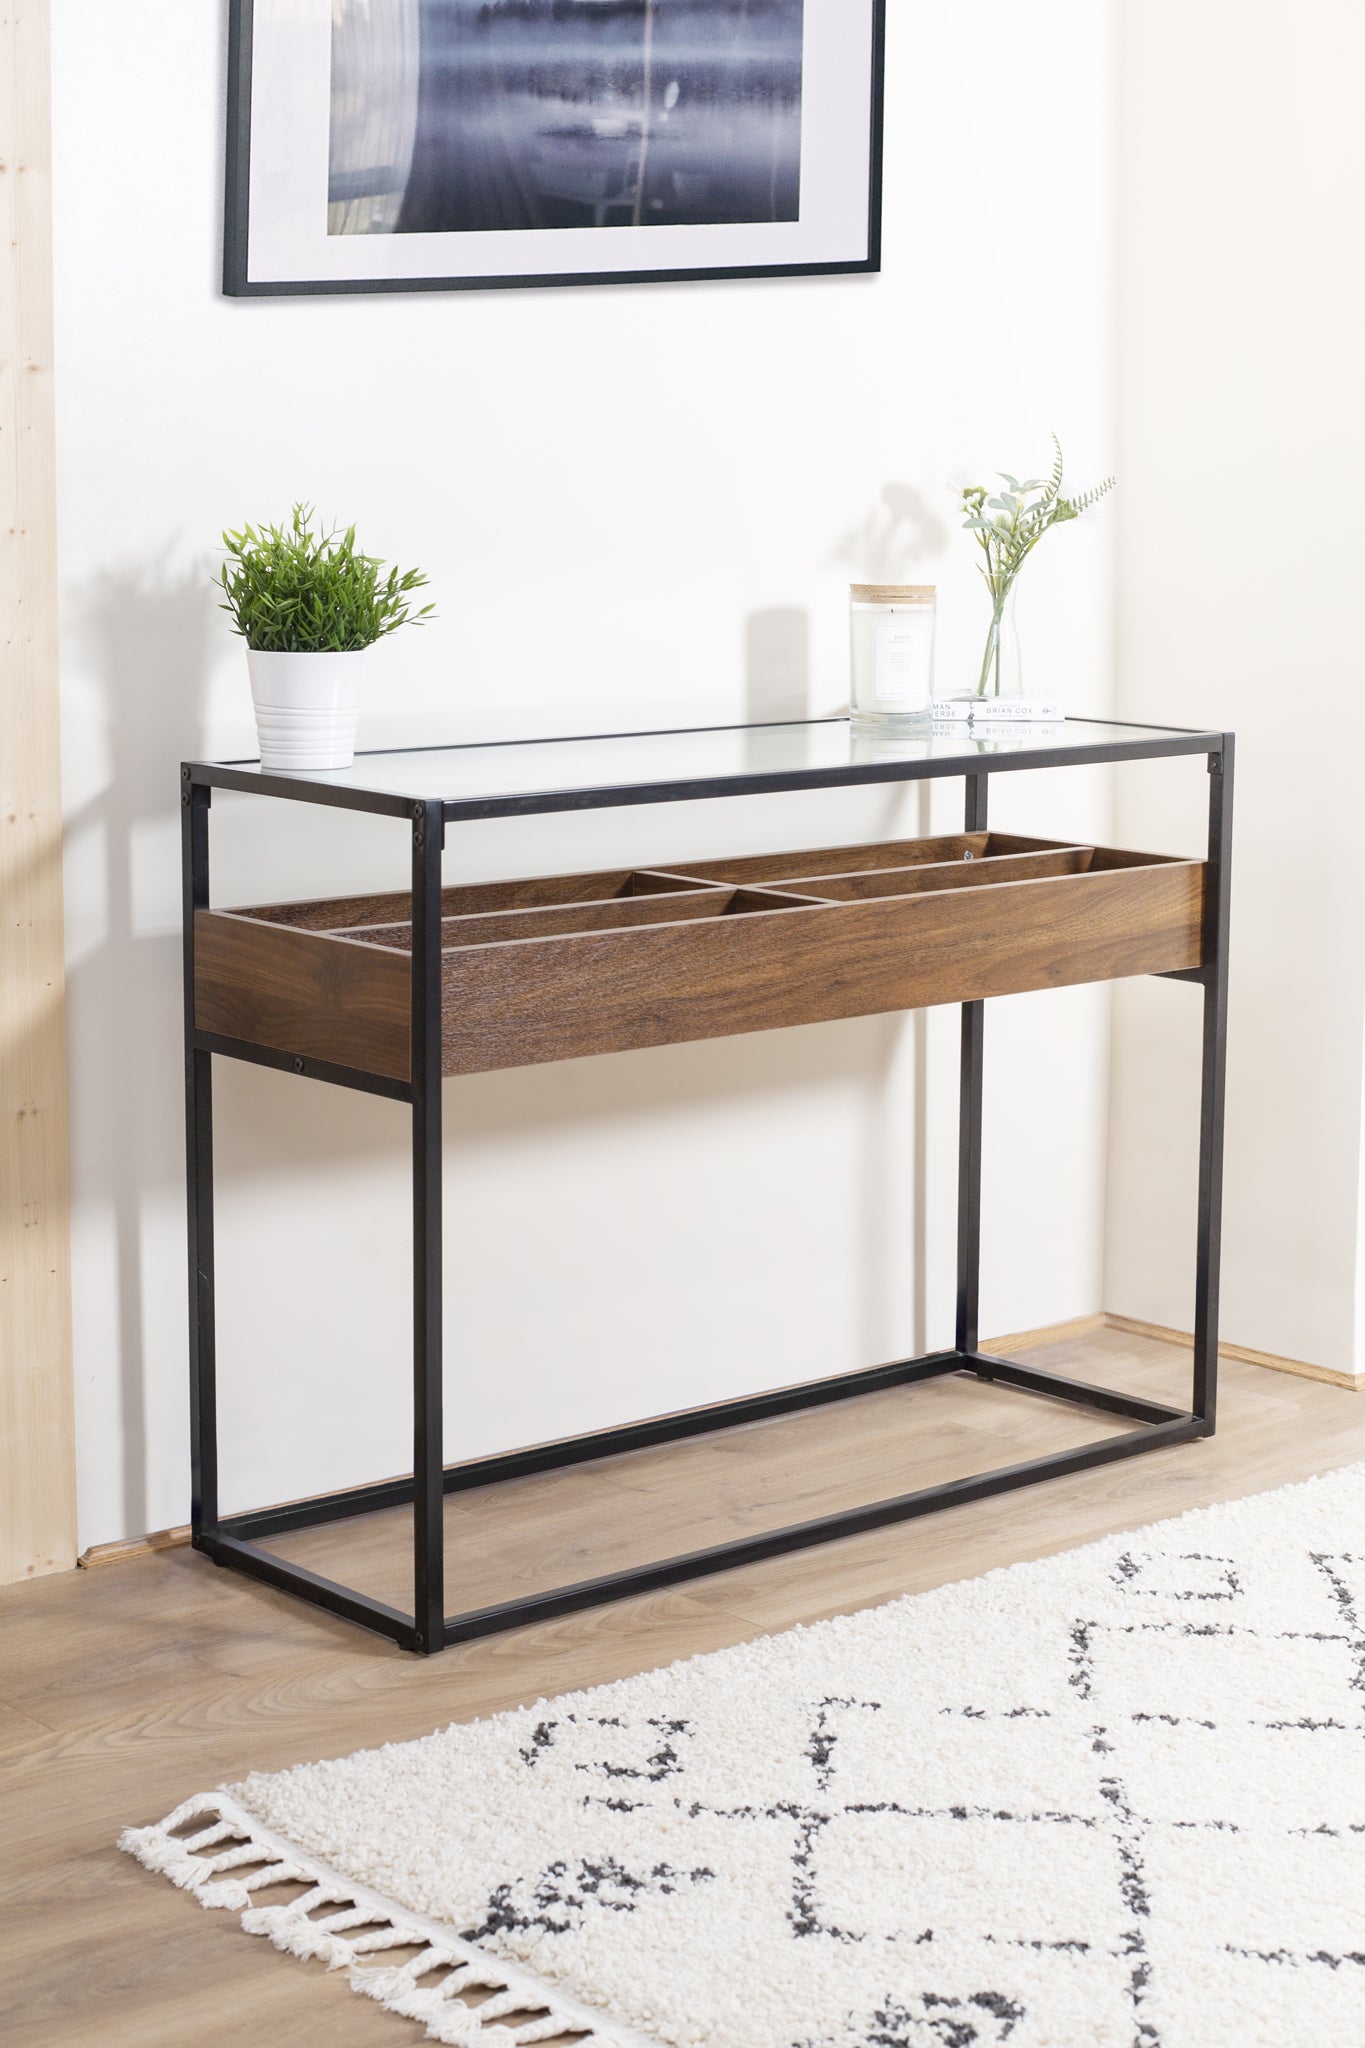 Glass Topped Console Table with Wooden Storage Shelf